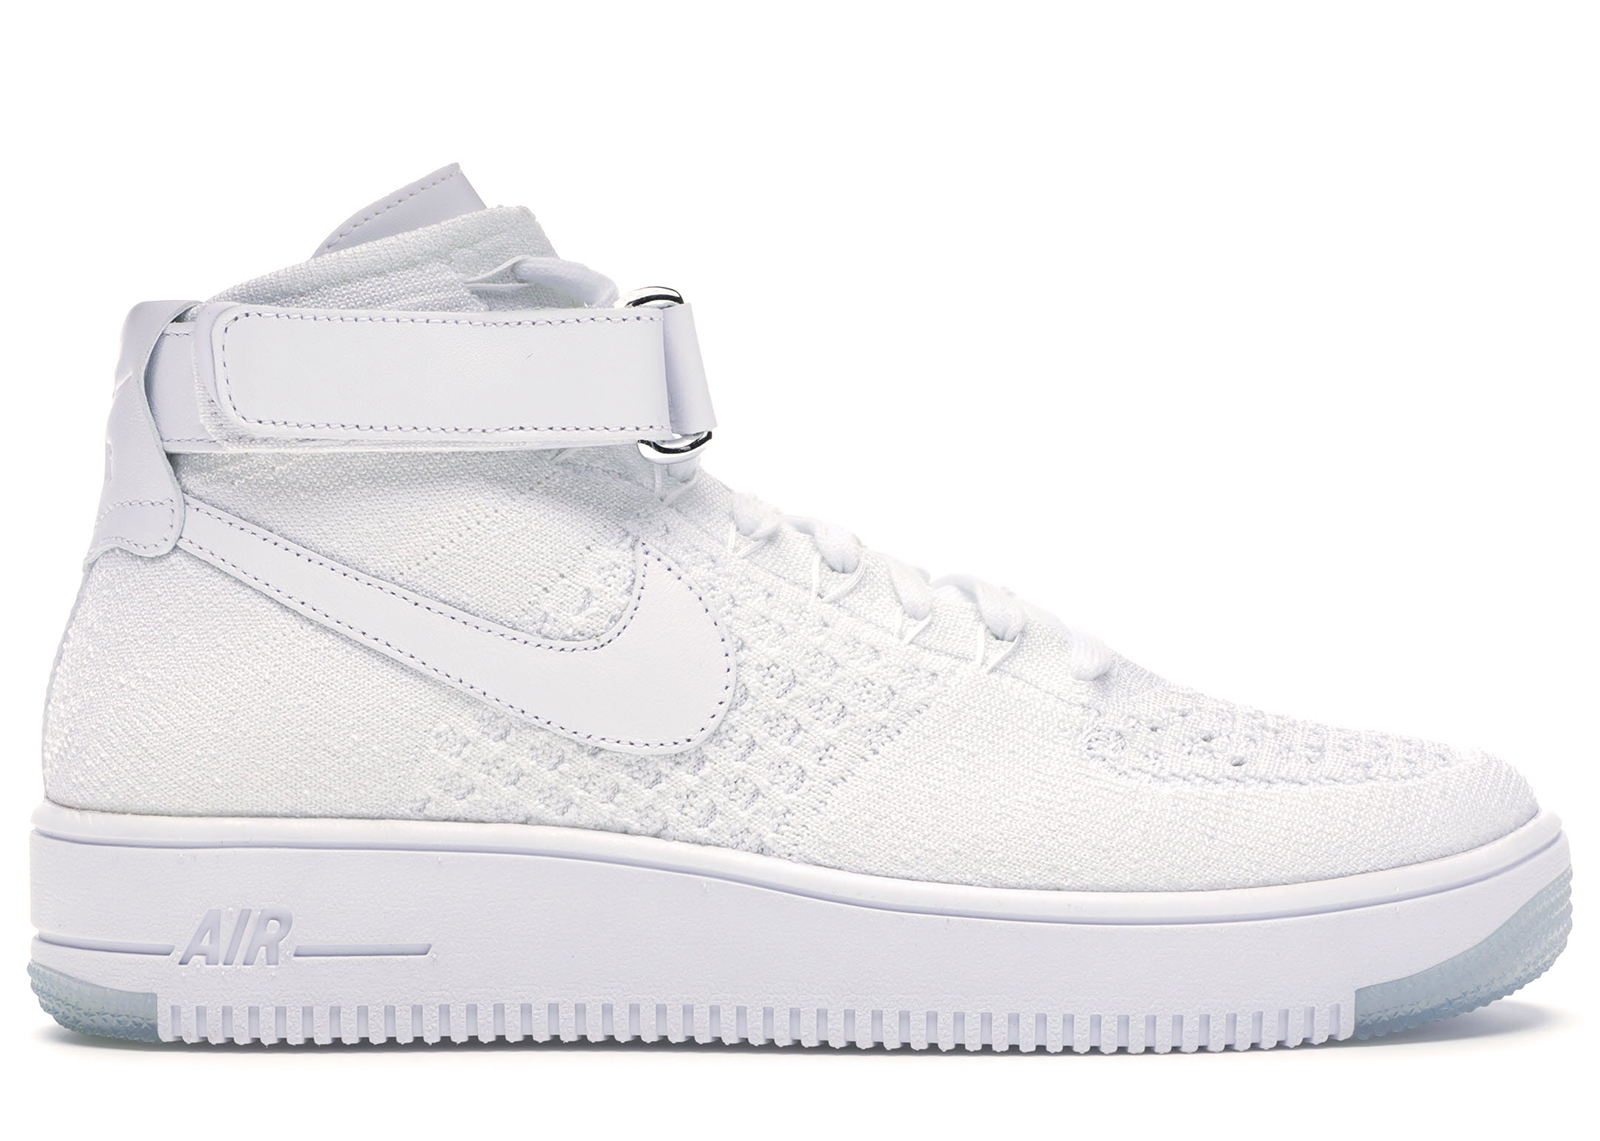 nike air force 1 ultra flyknit mid - men shoes